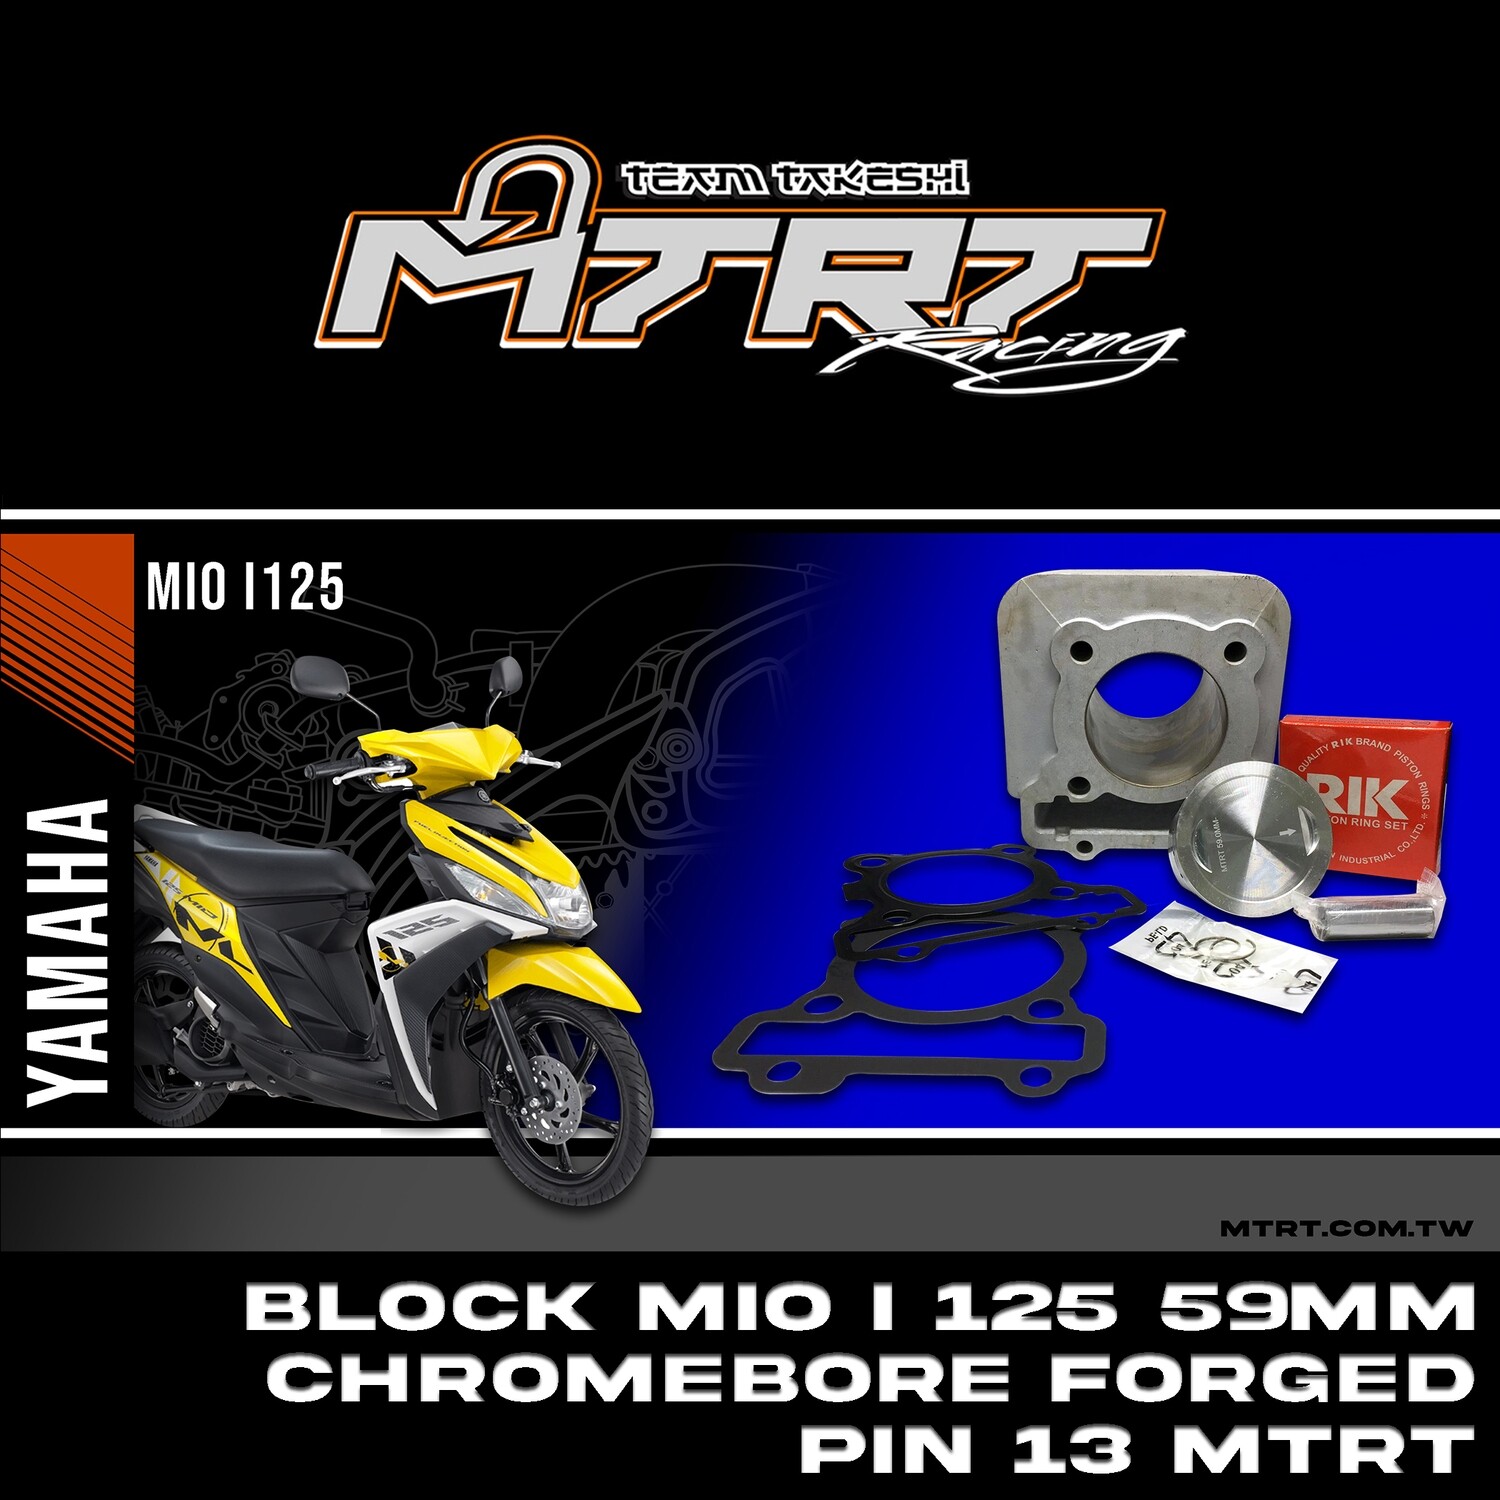 BLOCK MIOi125 59MM CHROMEBORE FORGED MTRT